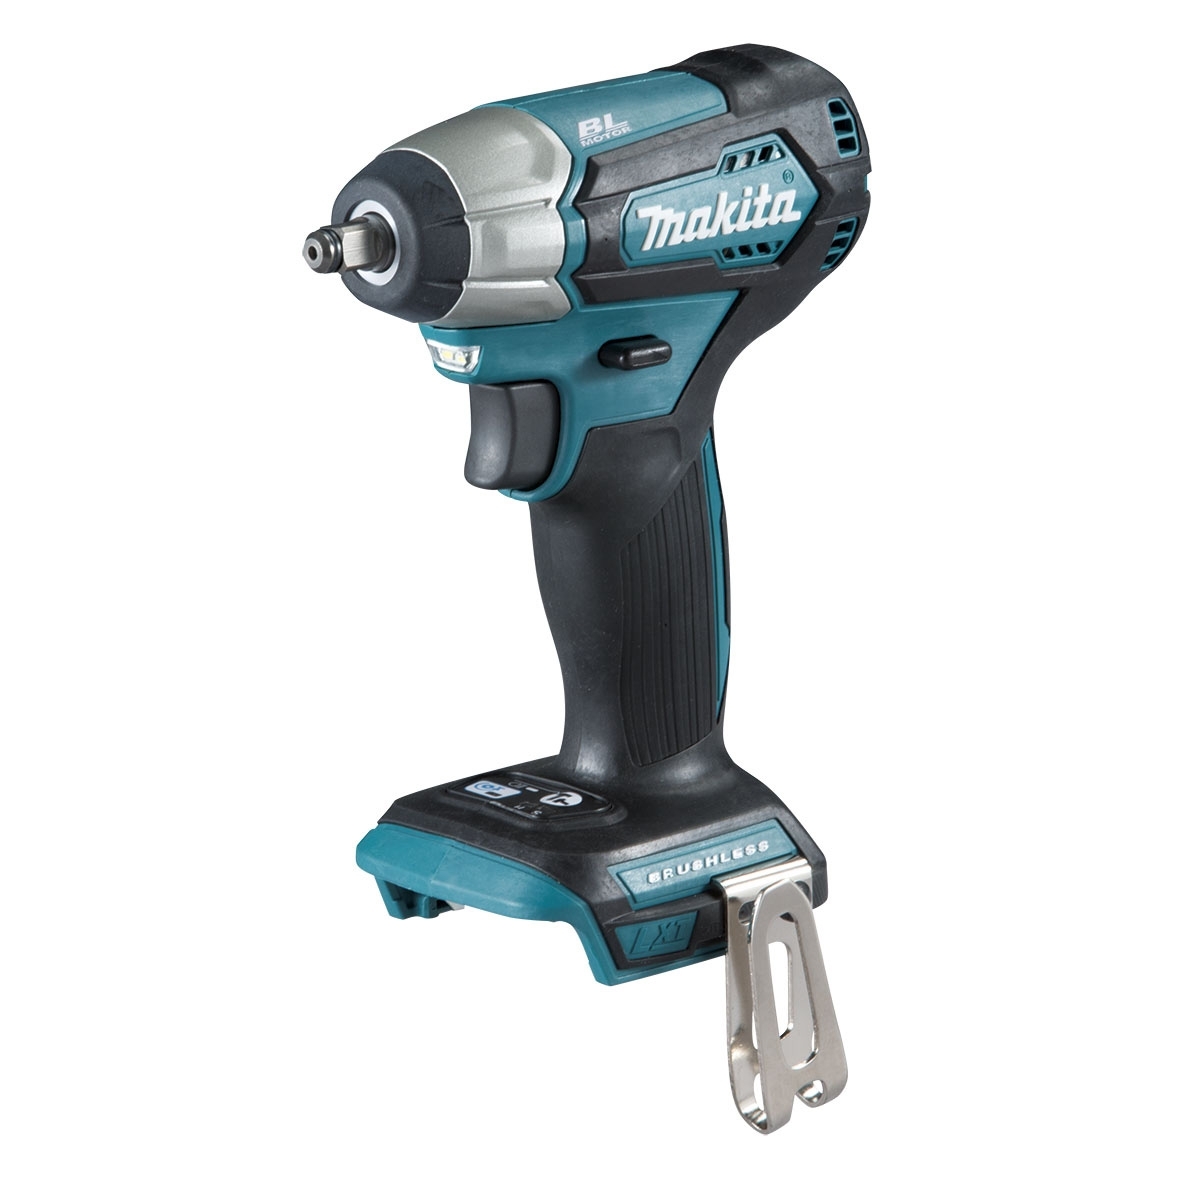 Makita 18V Brushless Sub-Compact 3/8" Impact Wrench (tool only) DTW180Z